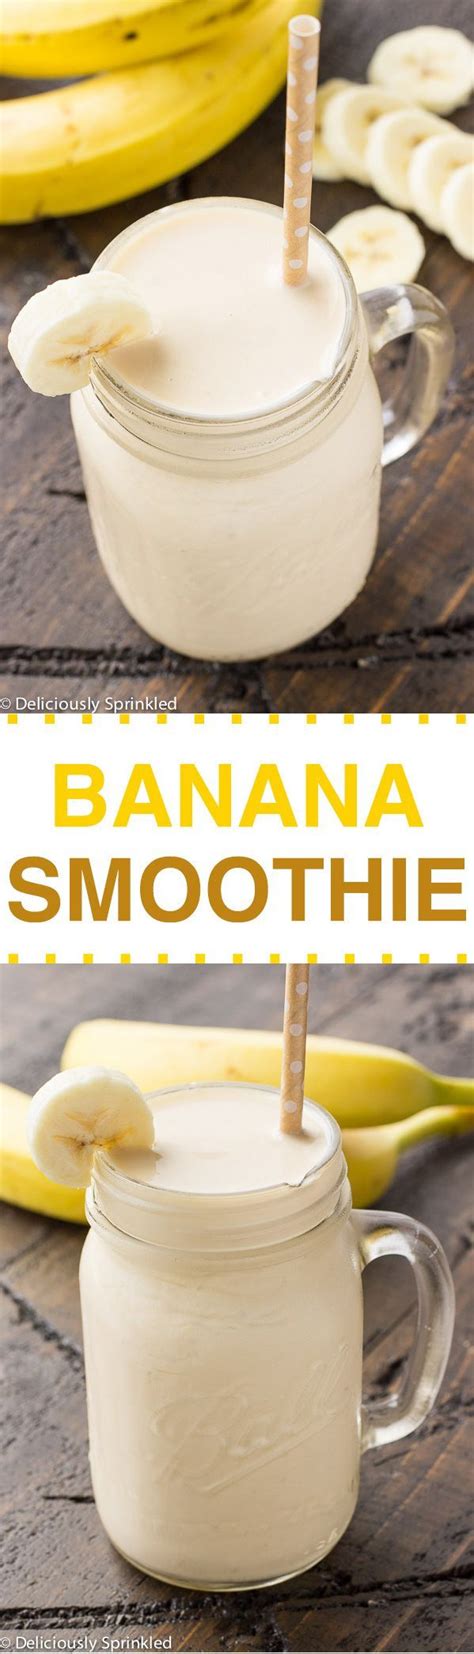 Banana Smoothie Recipe Easy To Make Breakfast Smoothie With Frozen